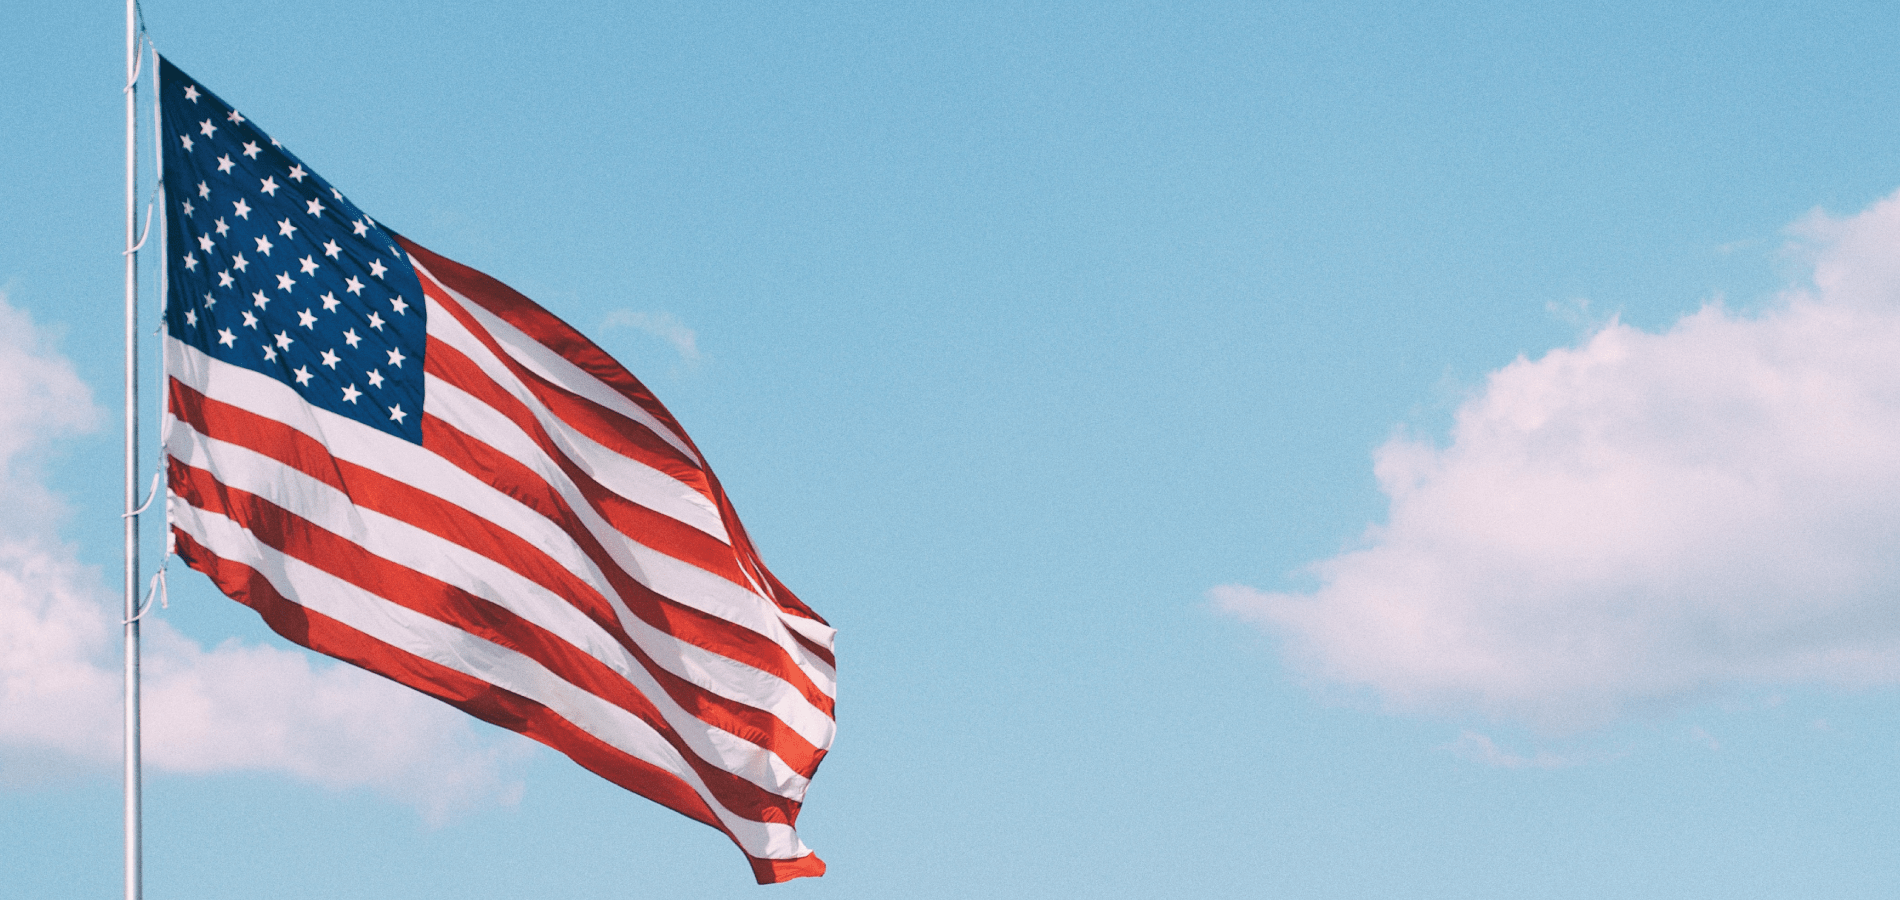 image of American flag against blue sky